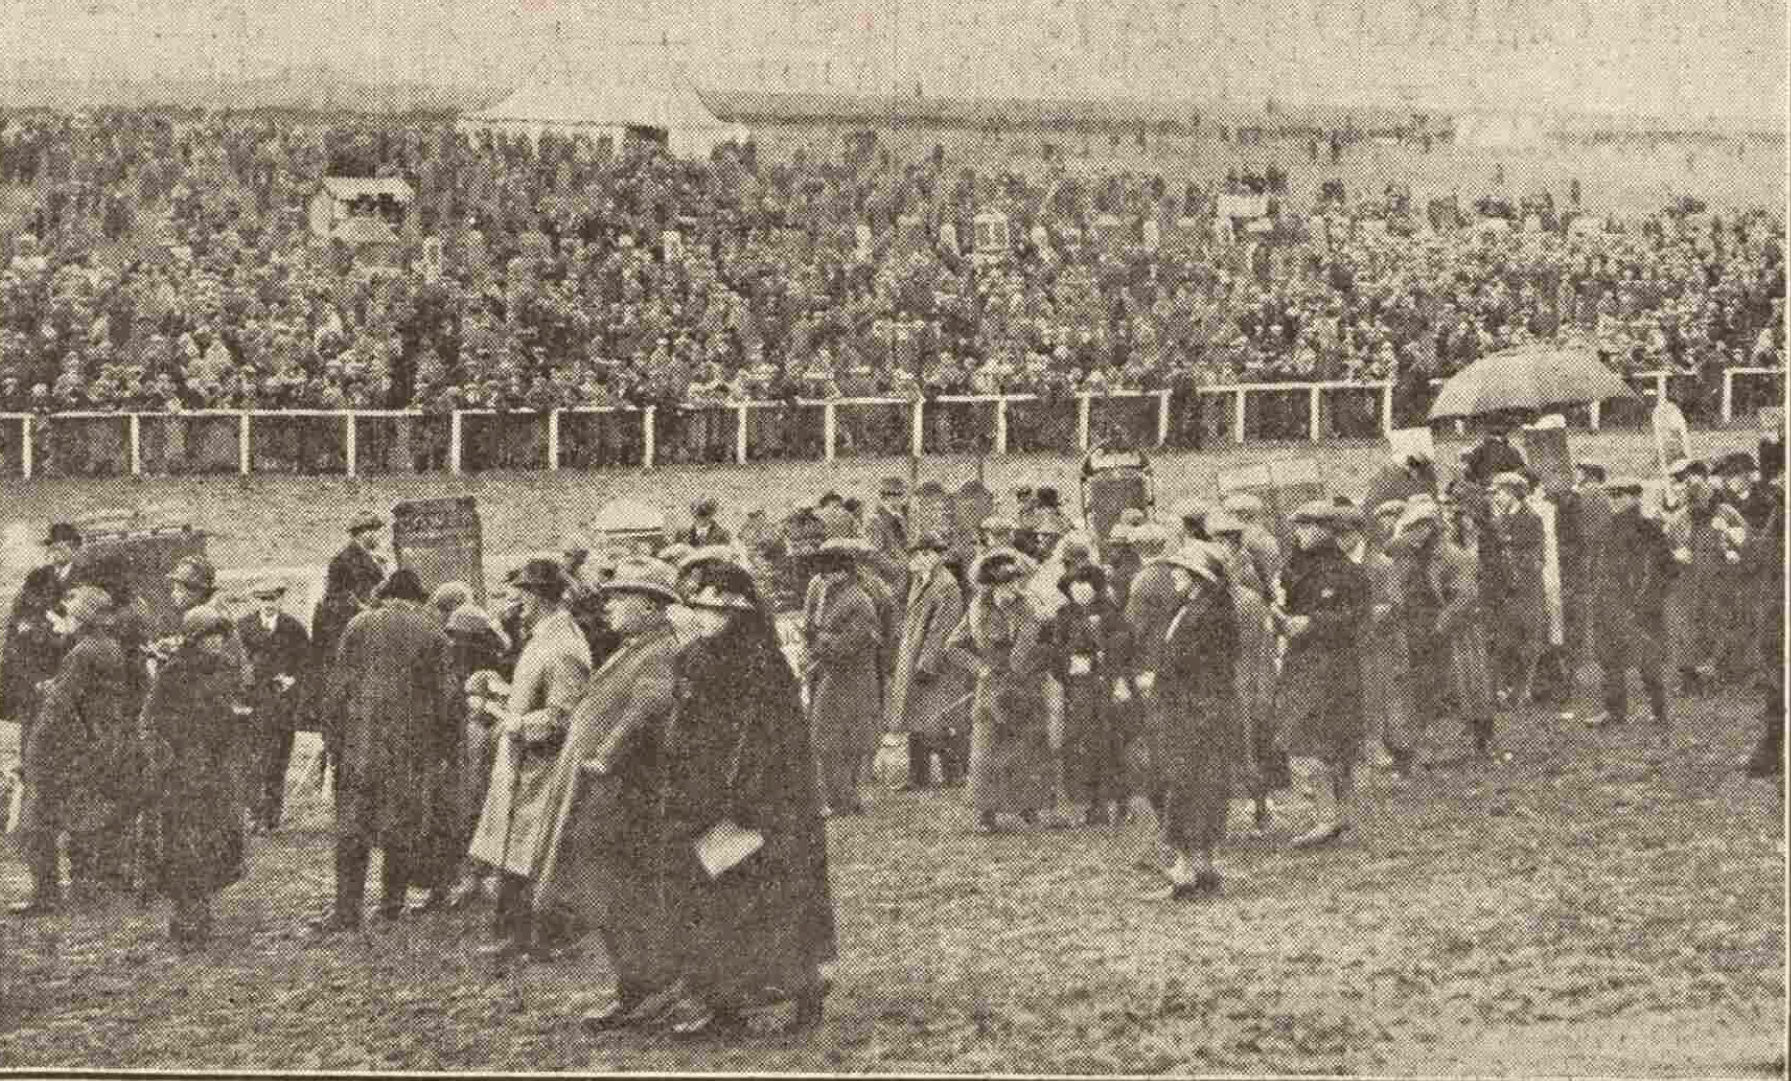 A large crowd enjoyed the opening race before attendances started to decline